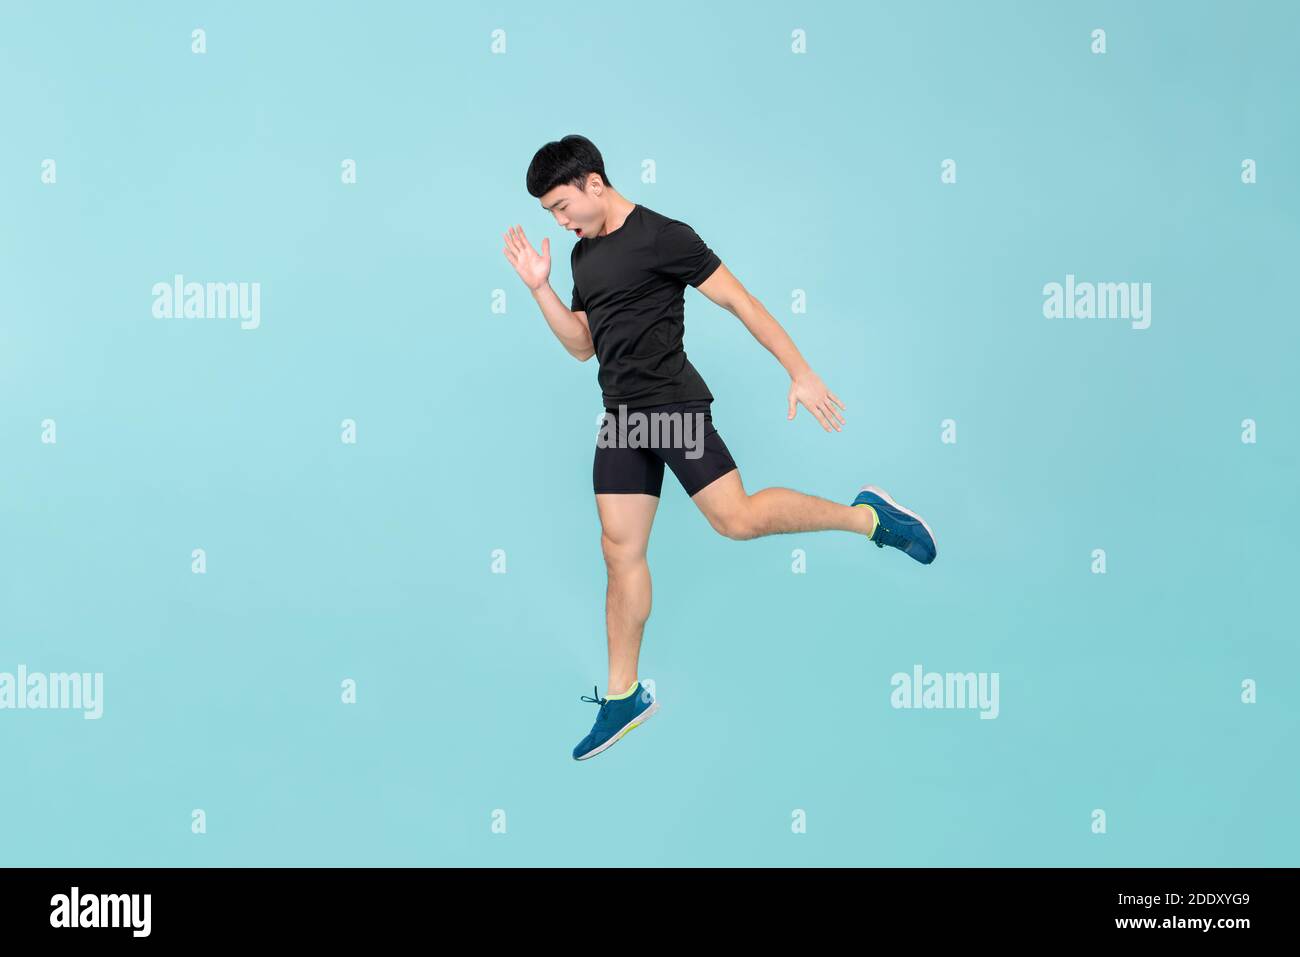 Full body of energetic young athlete Asian man jumping in light blue studio background Stock Photo